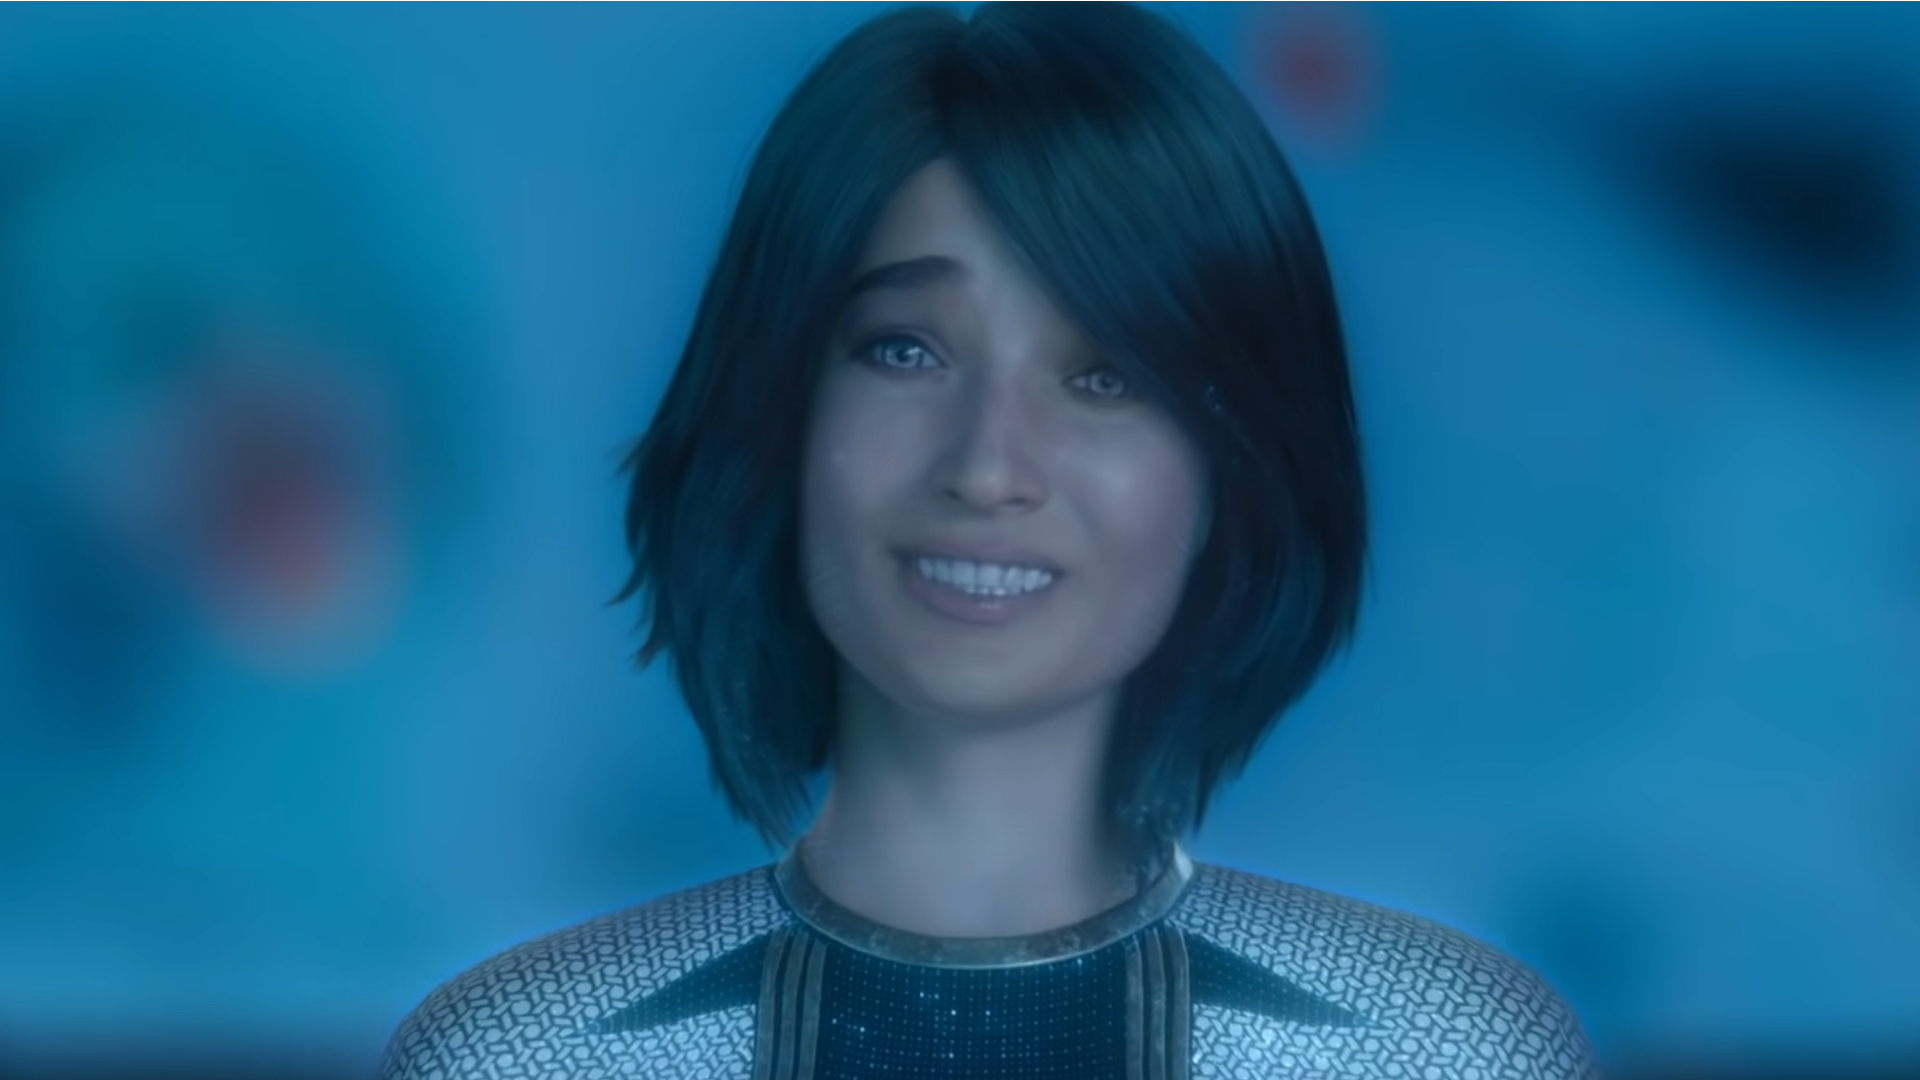  Halo fans are divided over the TV show's Cortana redesign 